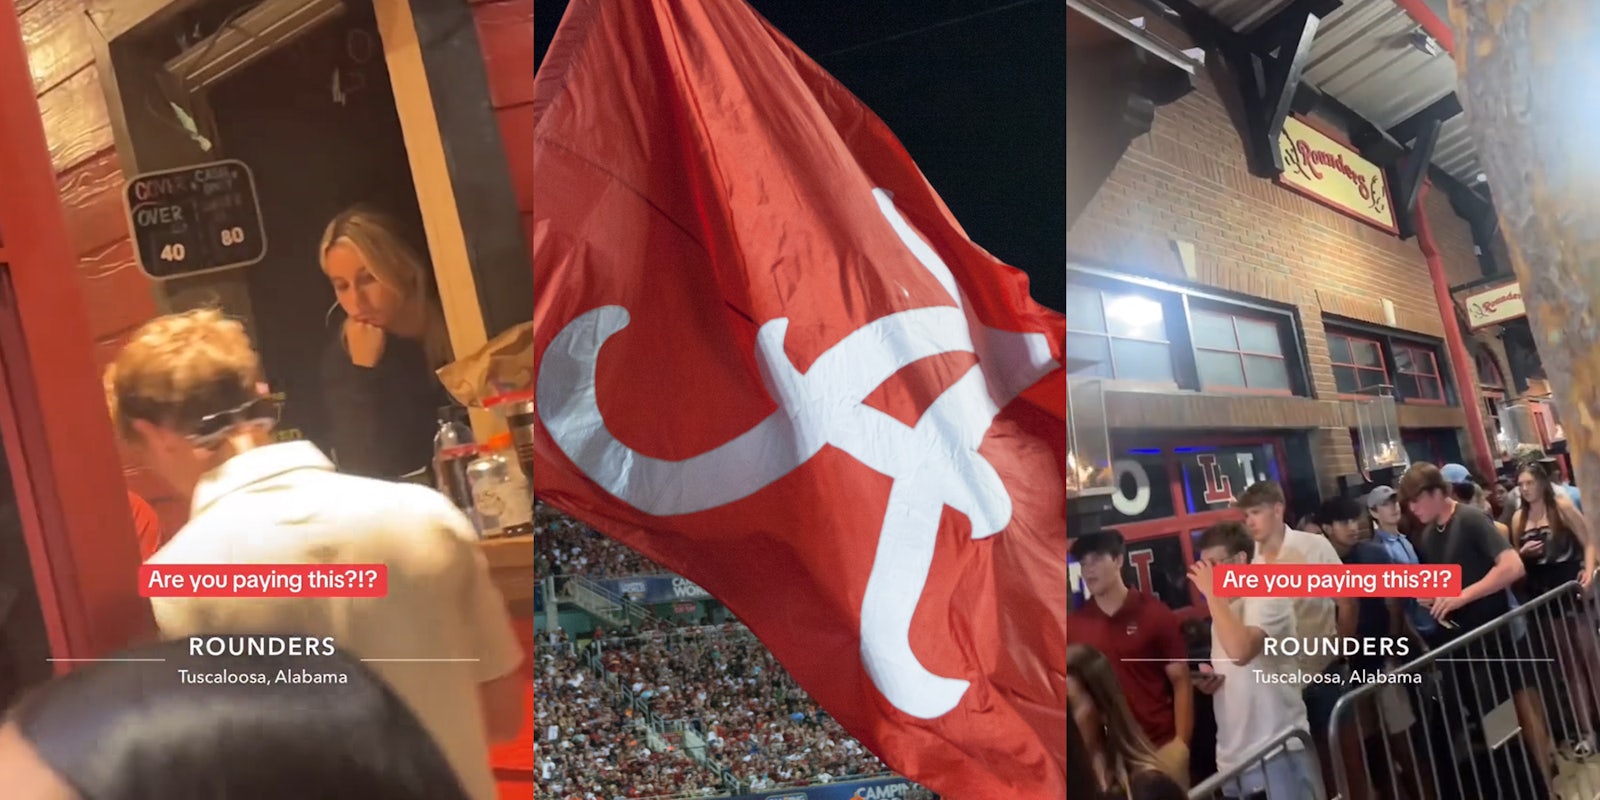 Rounders entrance with caption 'Are you paying this?!? Rounders Tuscaloosa, Alabama' (l) Crimson Tide Flag -Alabama Football Campingworld Kickoff (c) Rounders entrance with caption 'Are you paying this?!? Rounders Tuscaloosa, Alabama' (r)